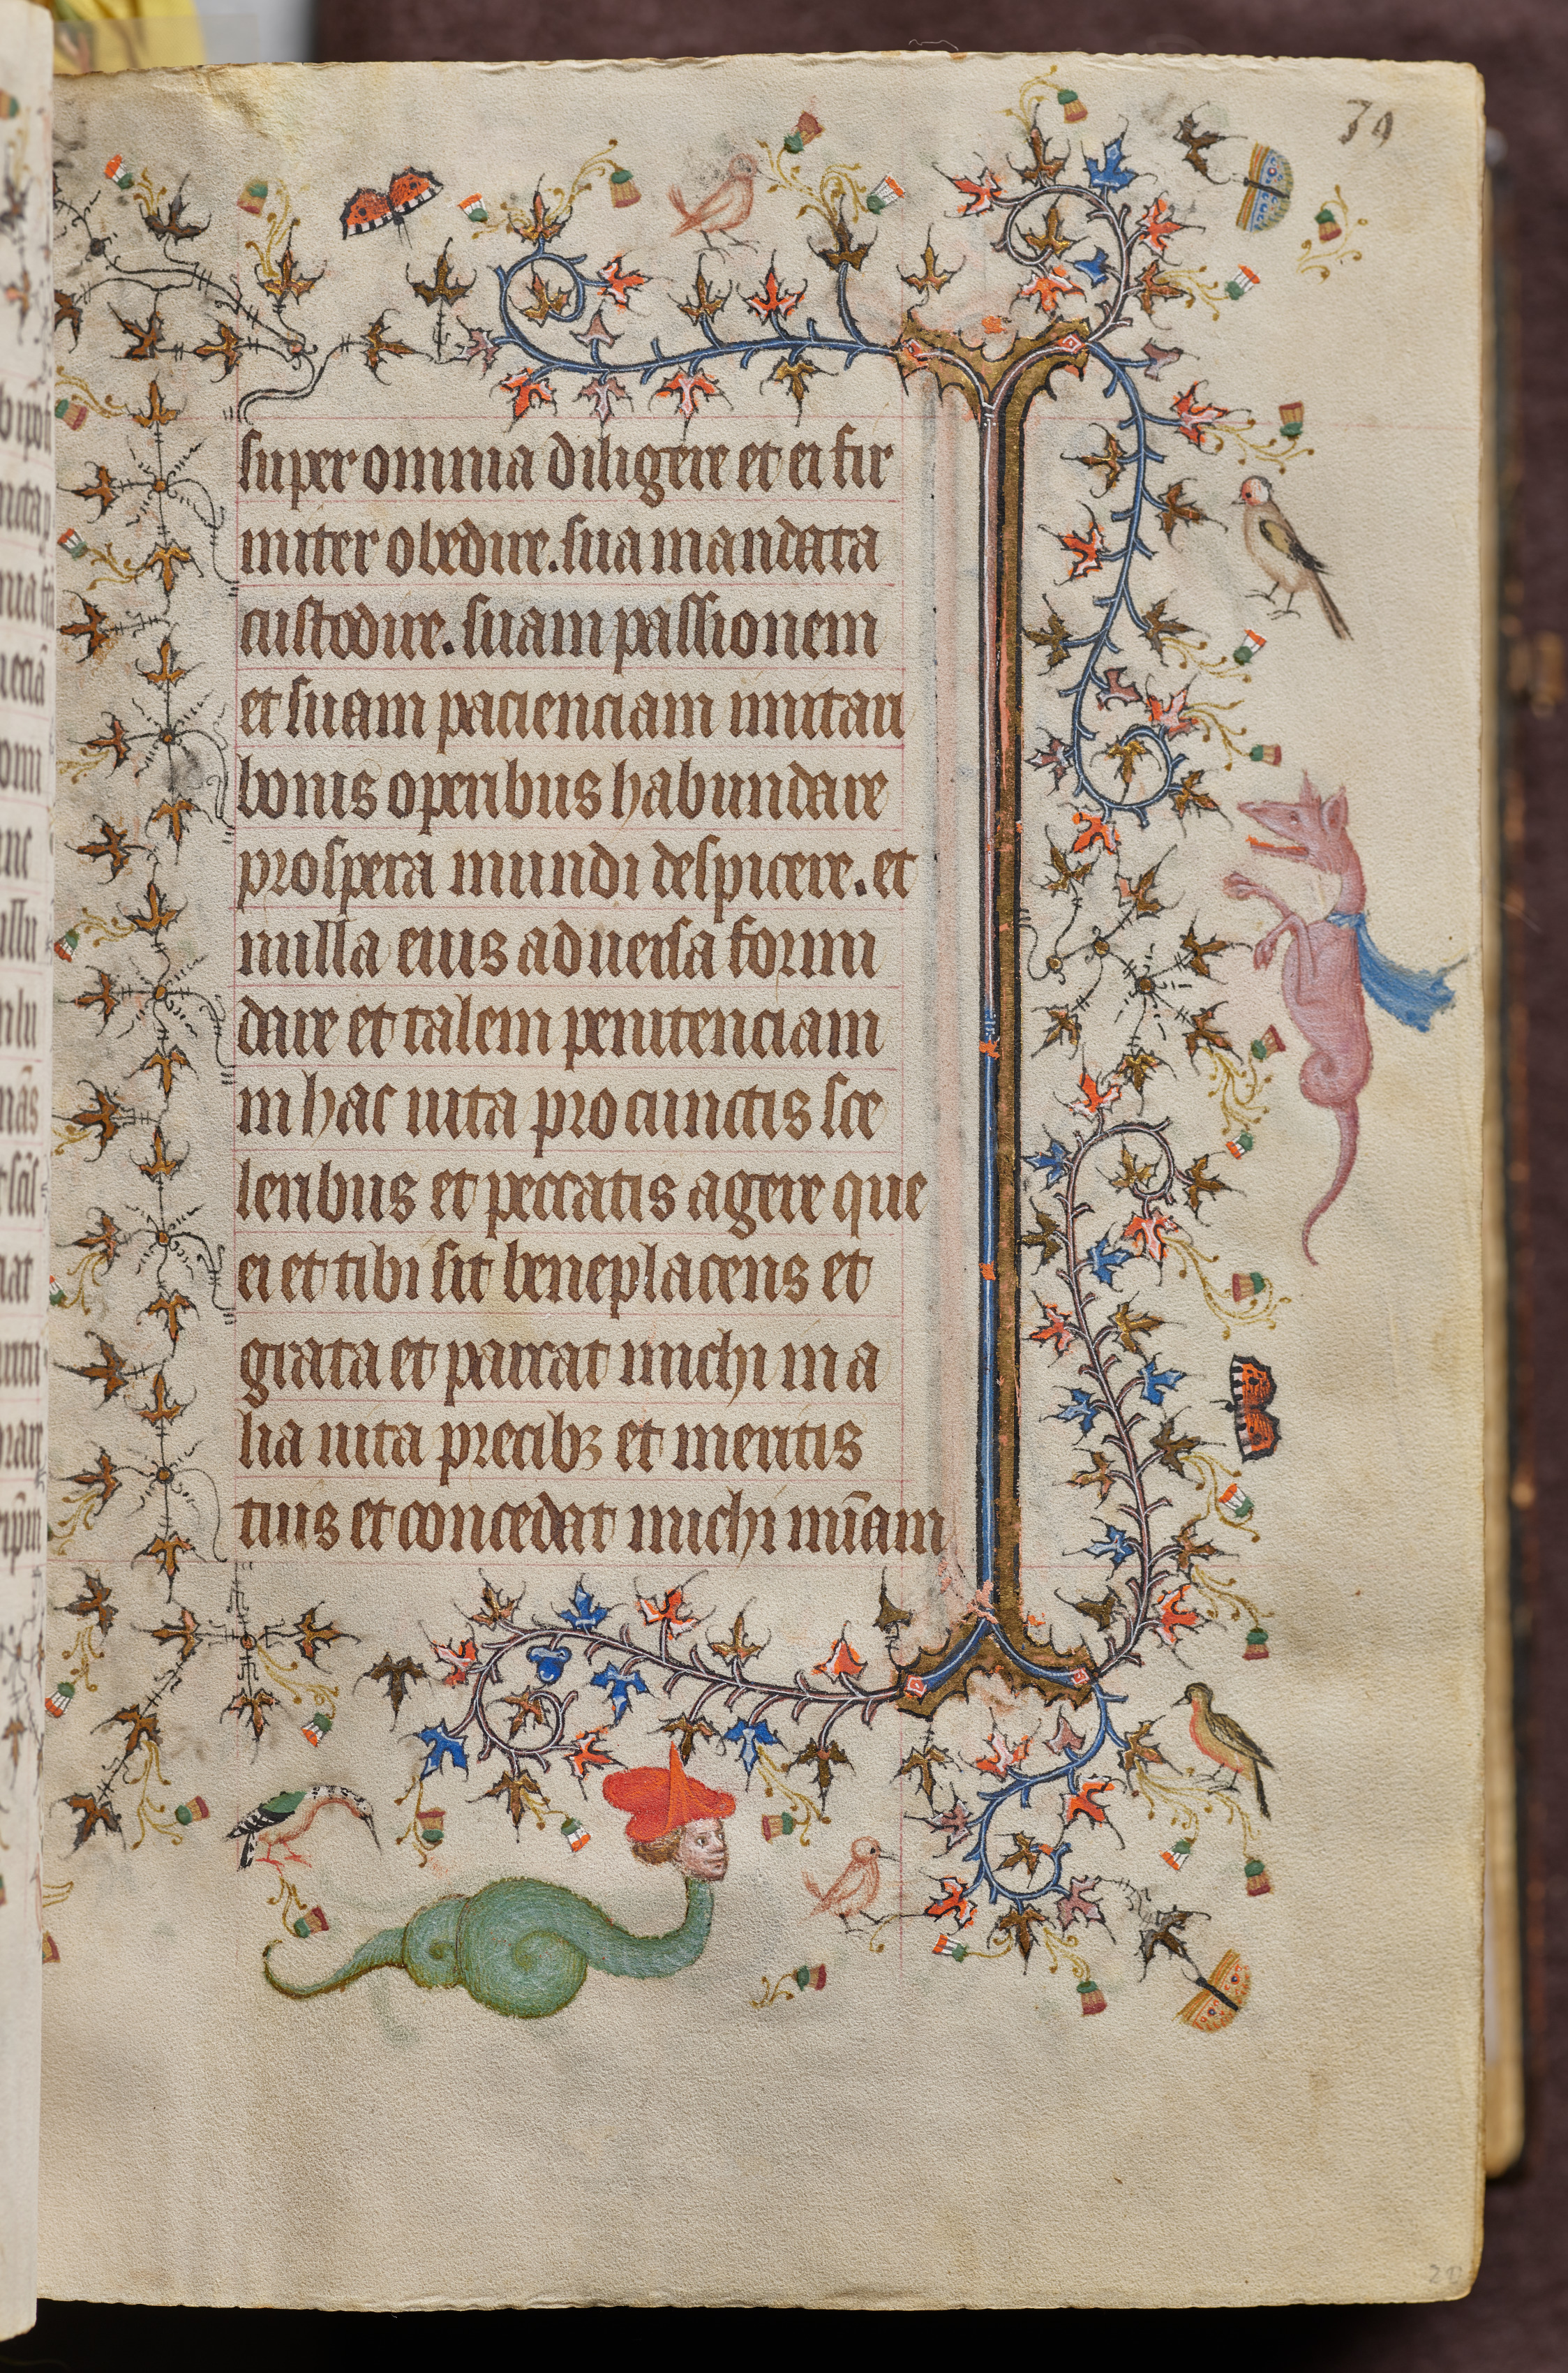 Hours of Charles the Noble, King of Navarre (1361-1425): fol. 20r, Text